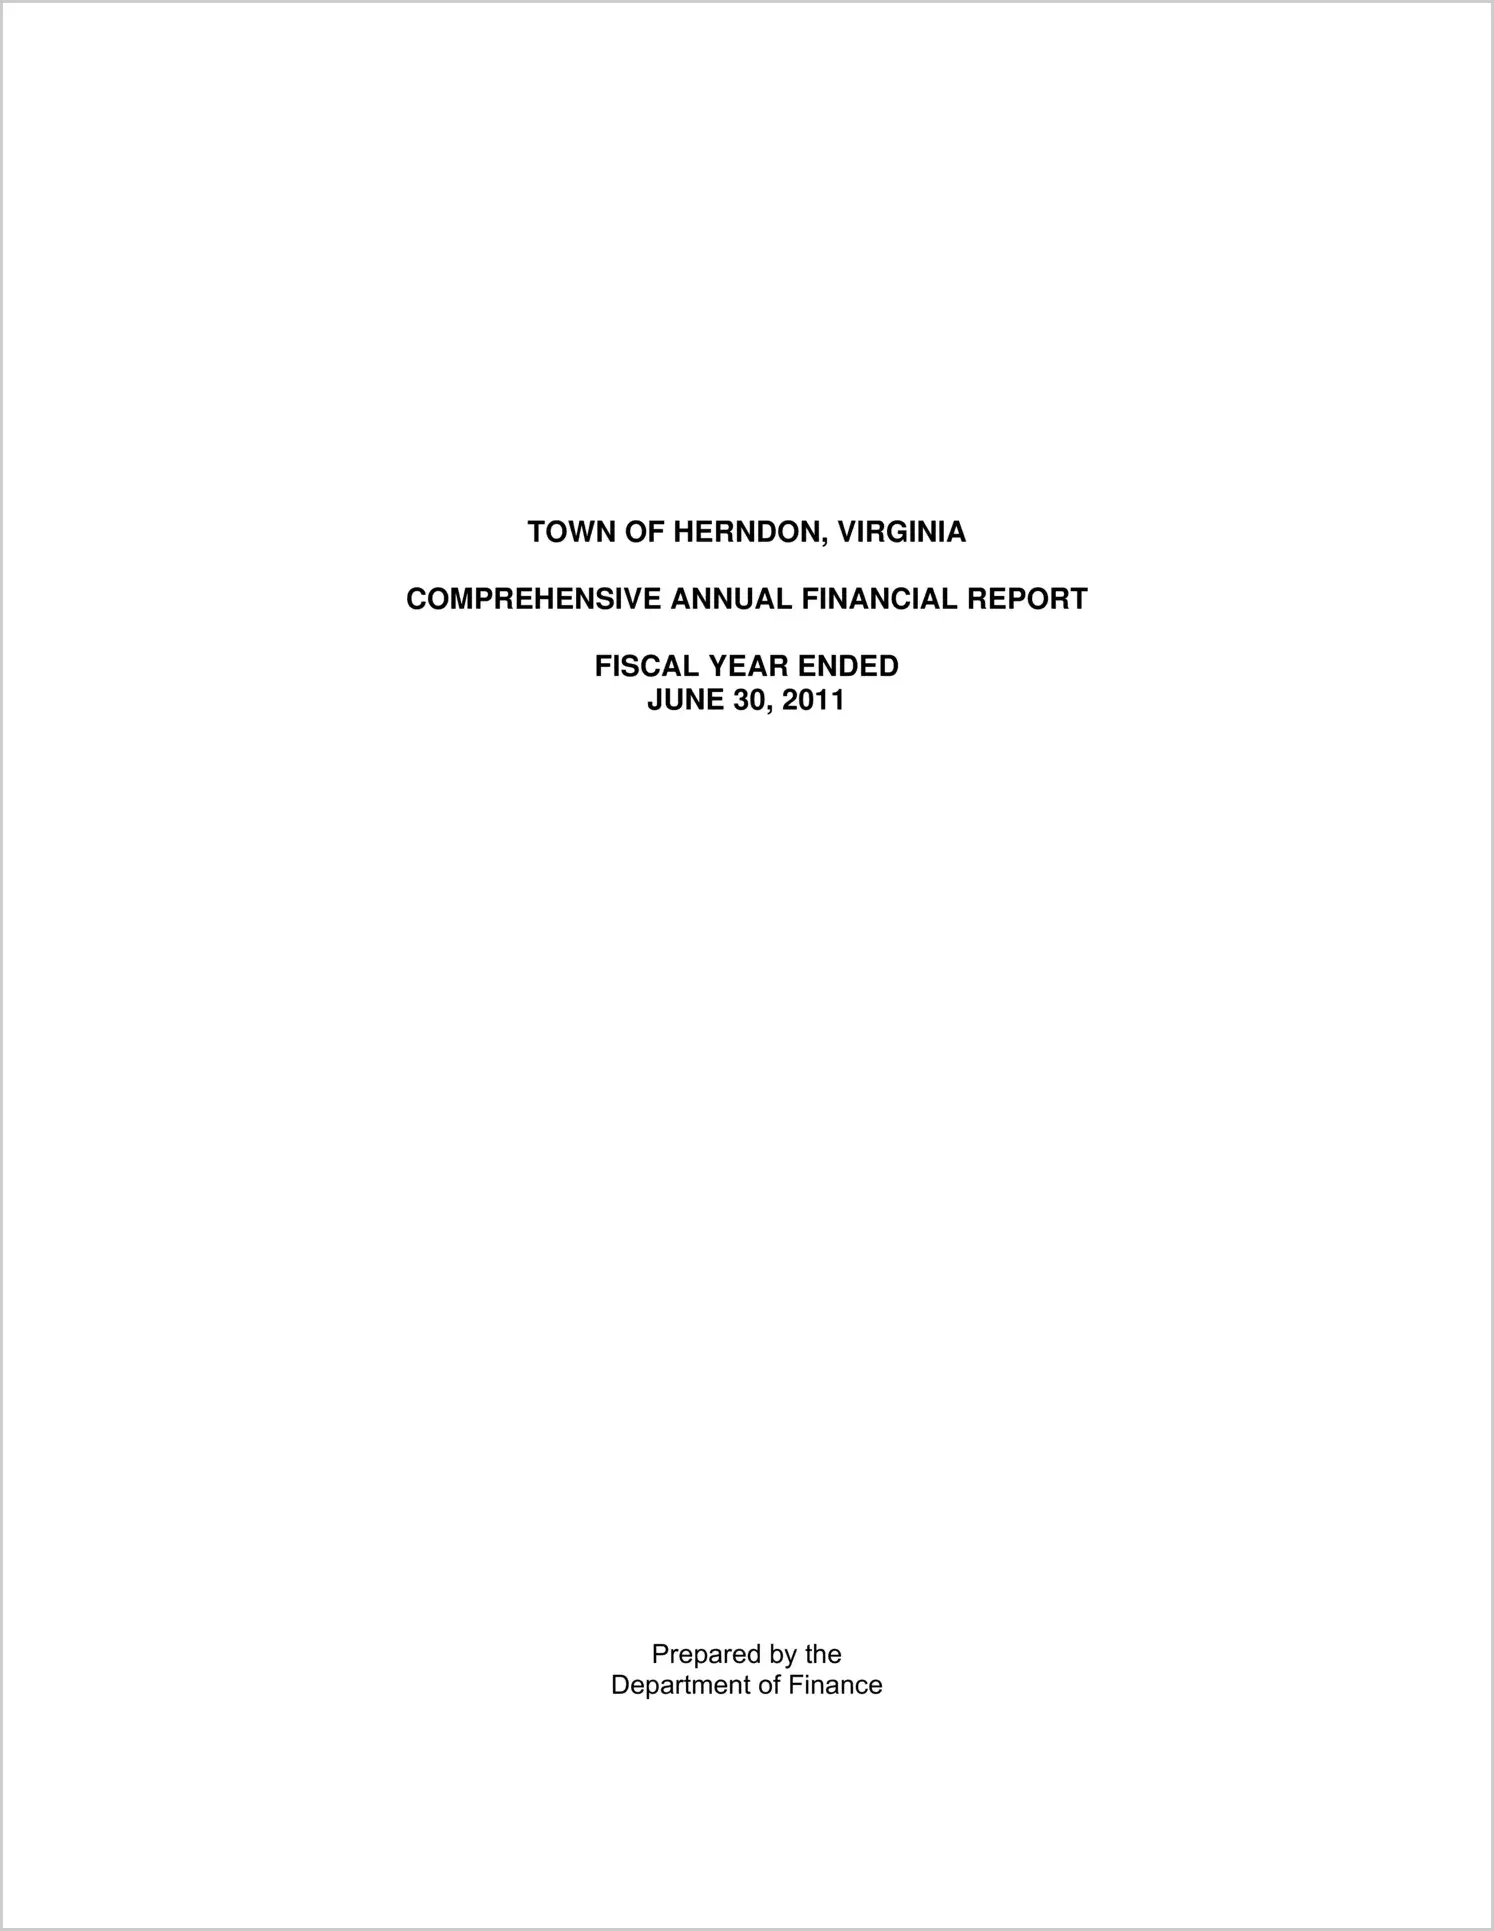 2010 Annual Financial Report for Town of Herndon